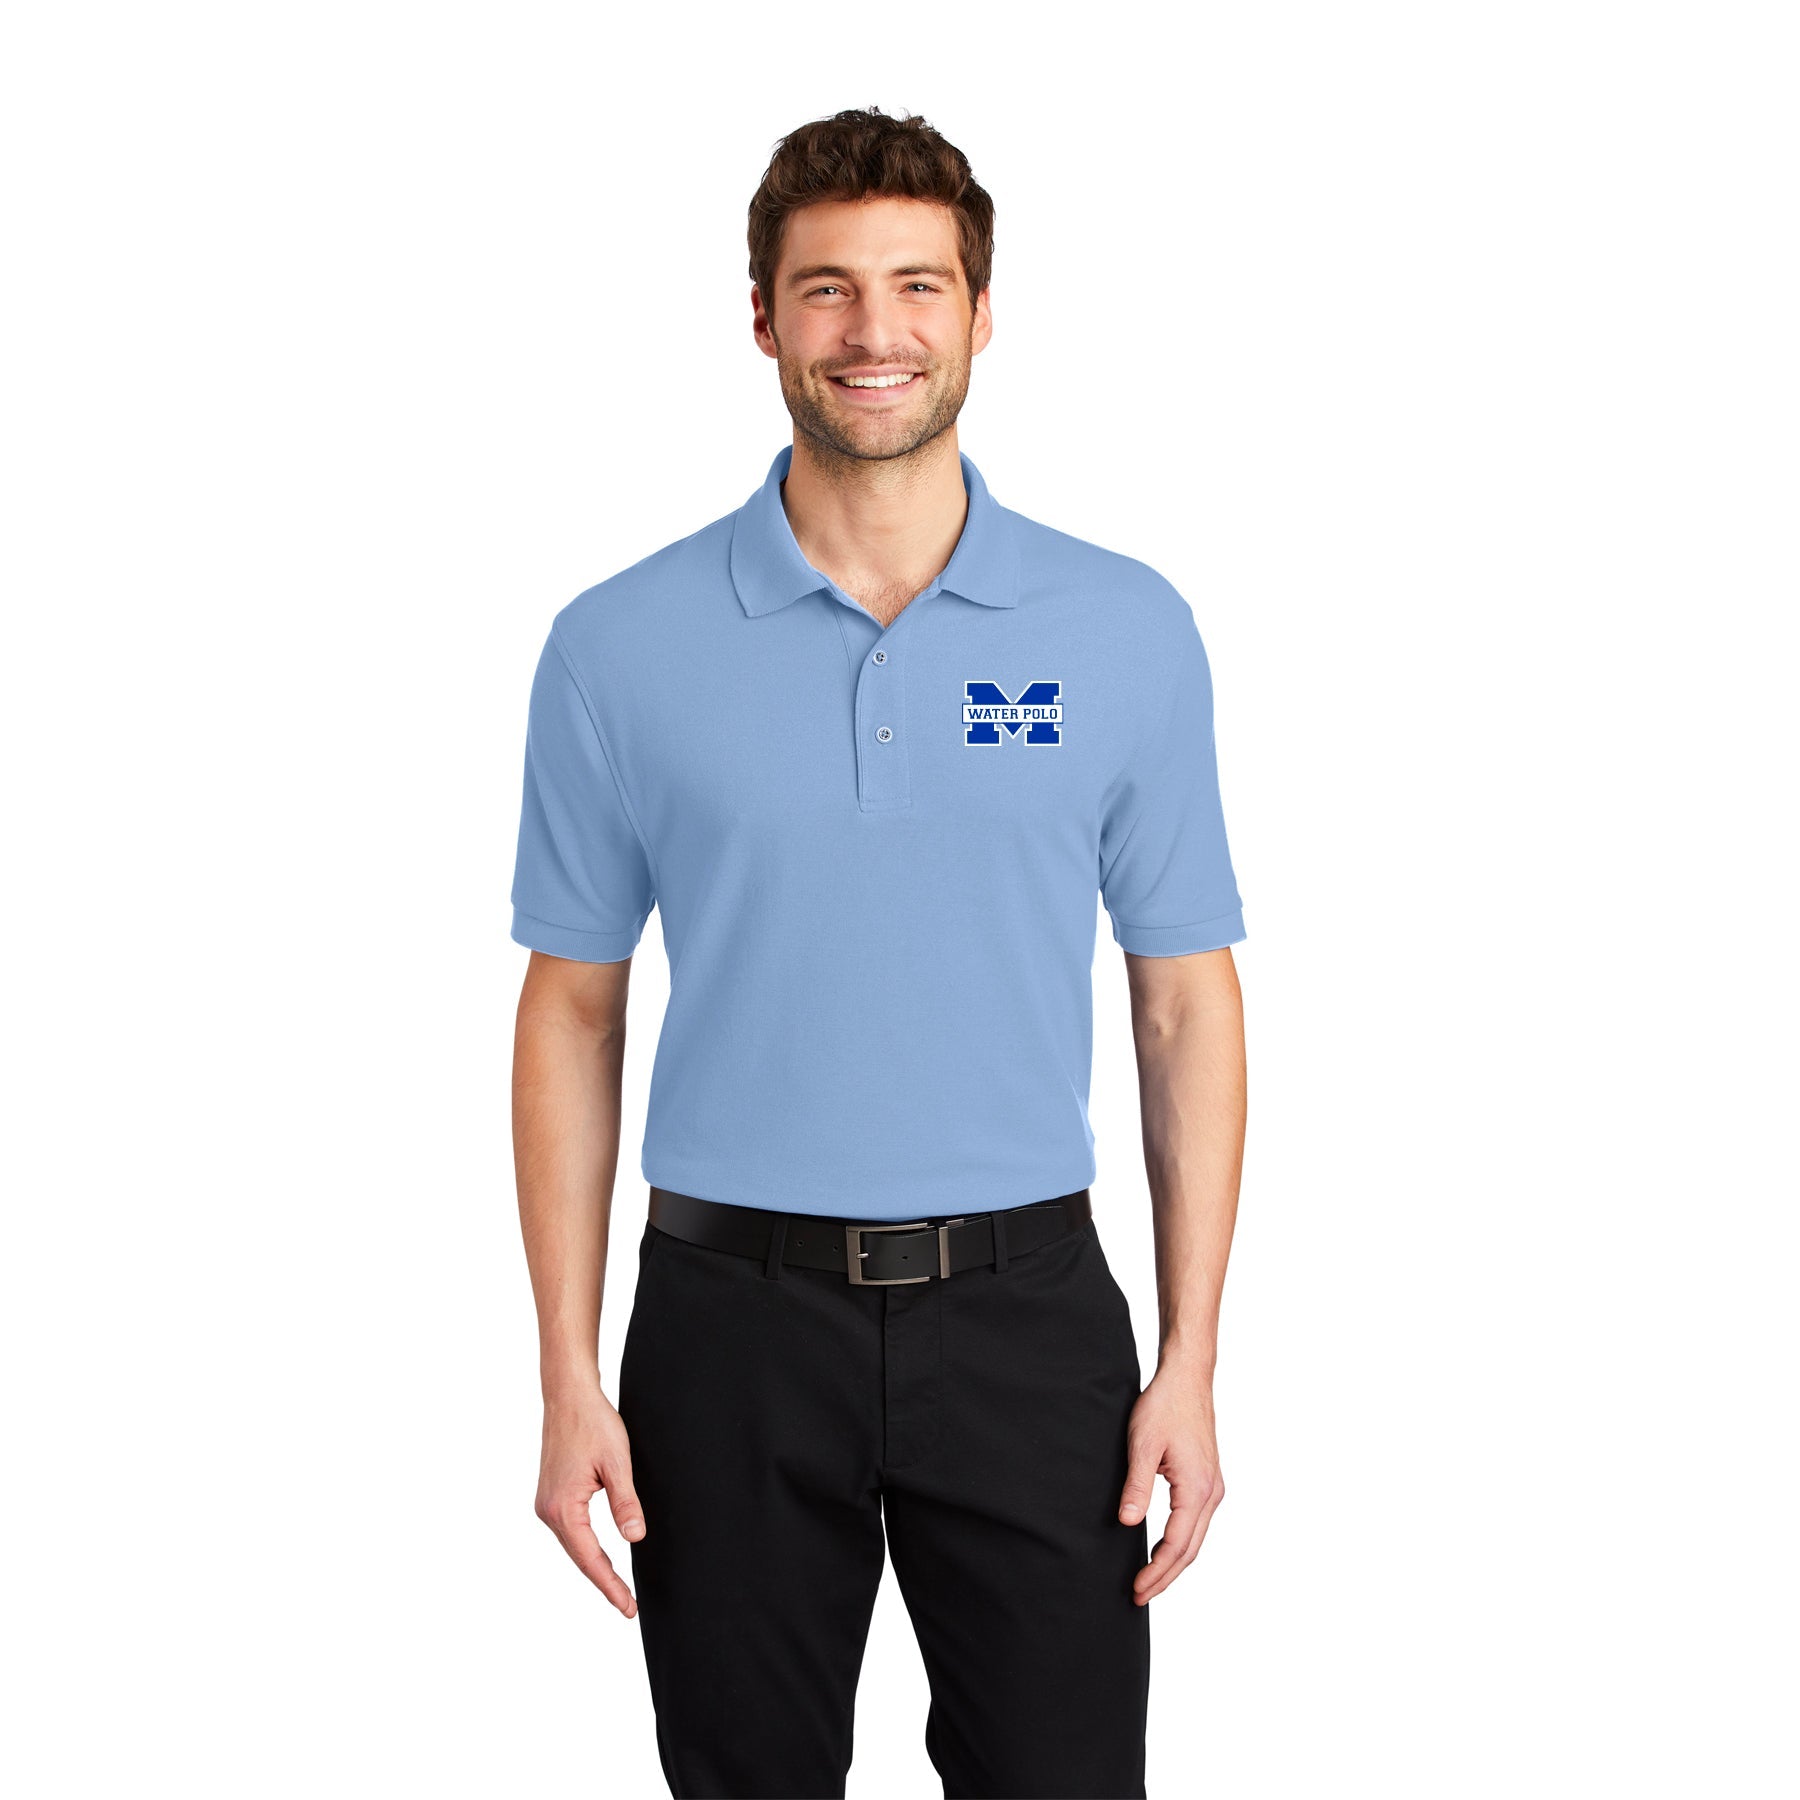 MIRA MESA WATER POLO SPIRIT PACK EMBROIDERED LOGO SILK TOUCH POLO